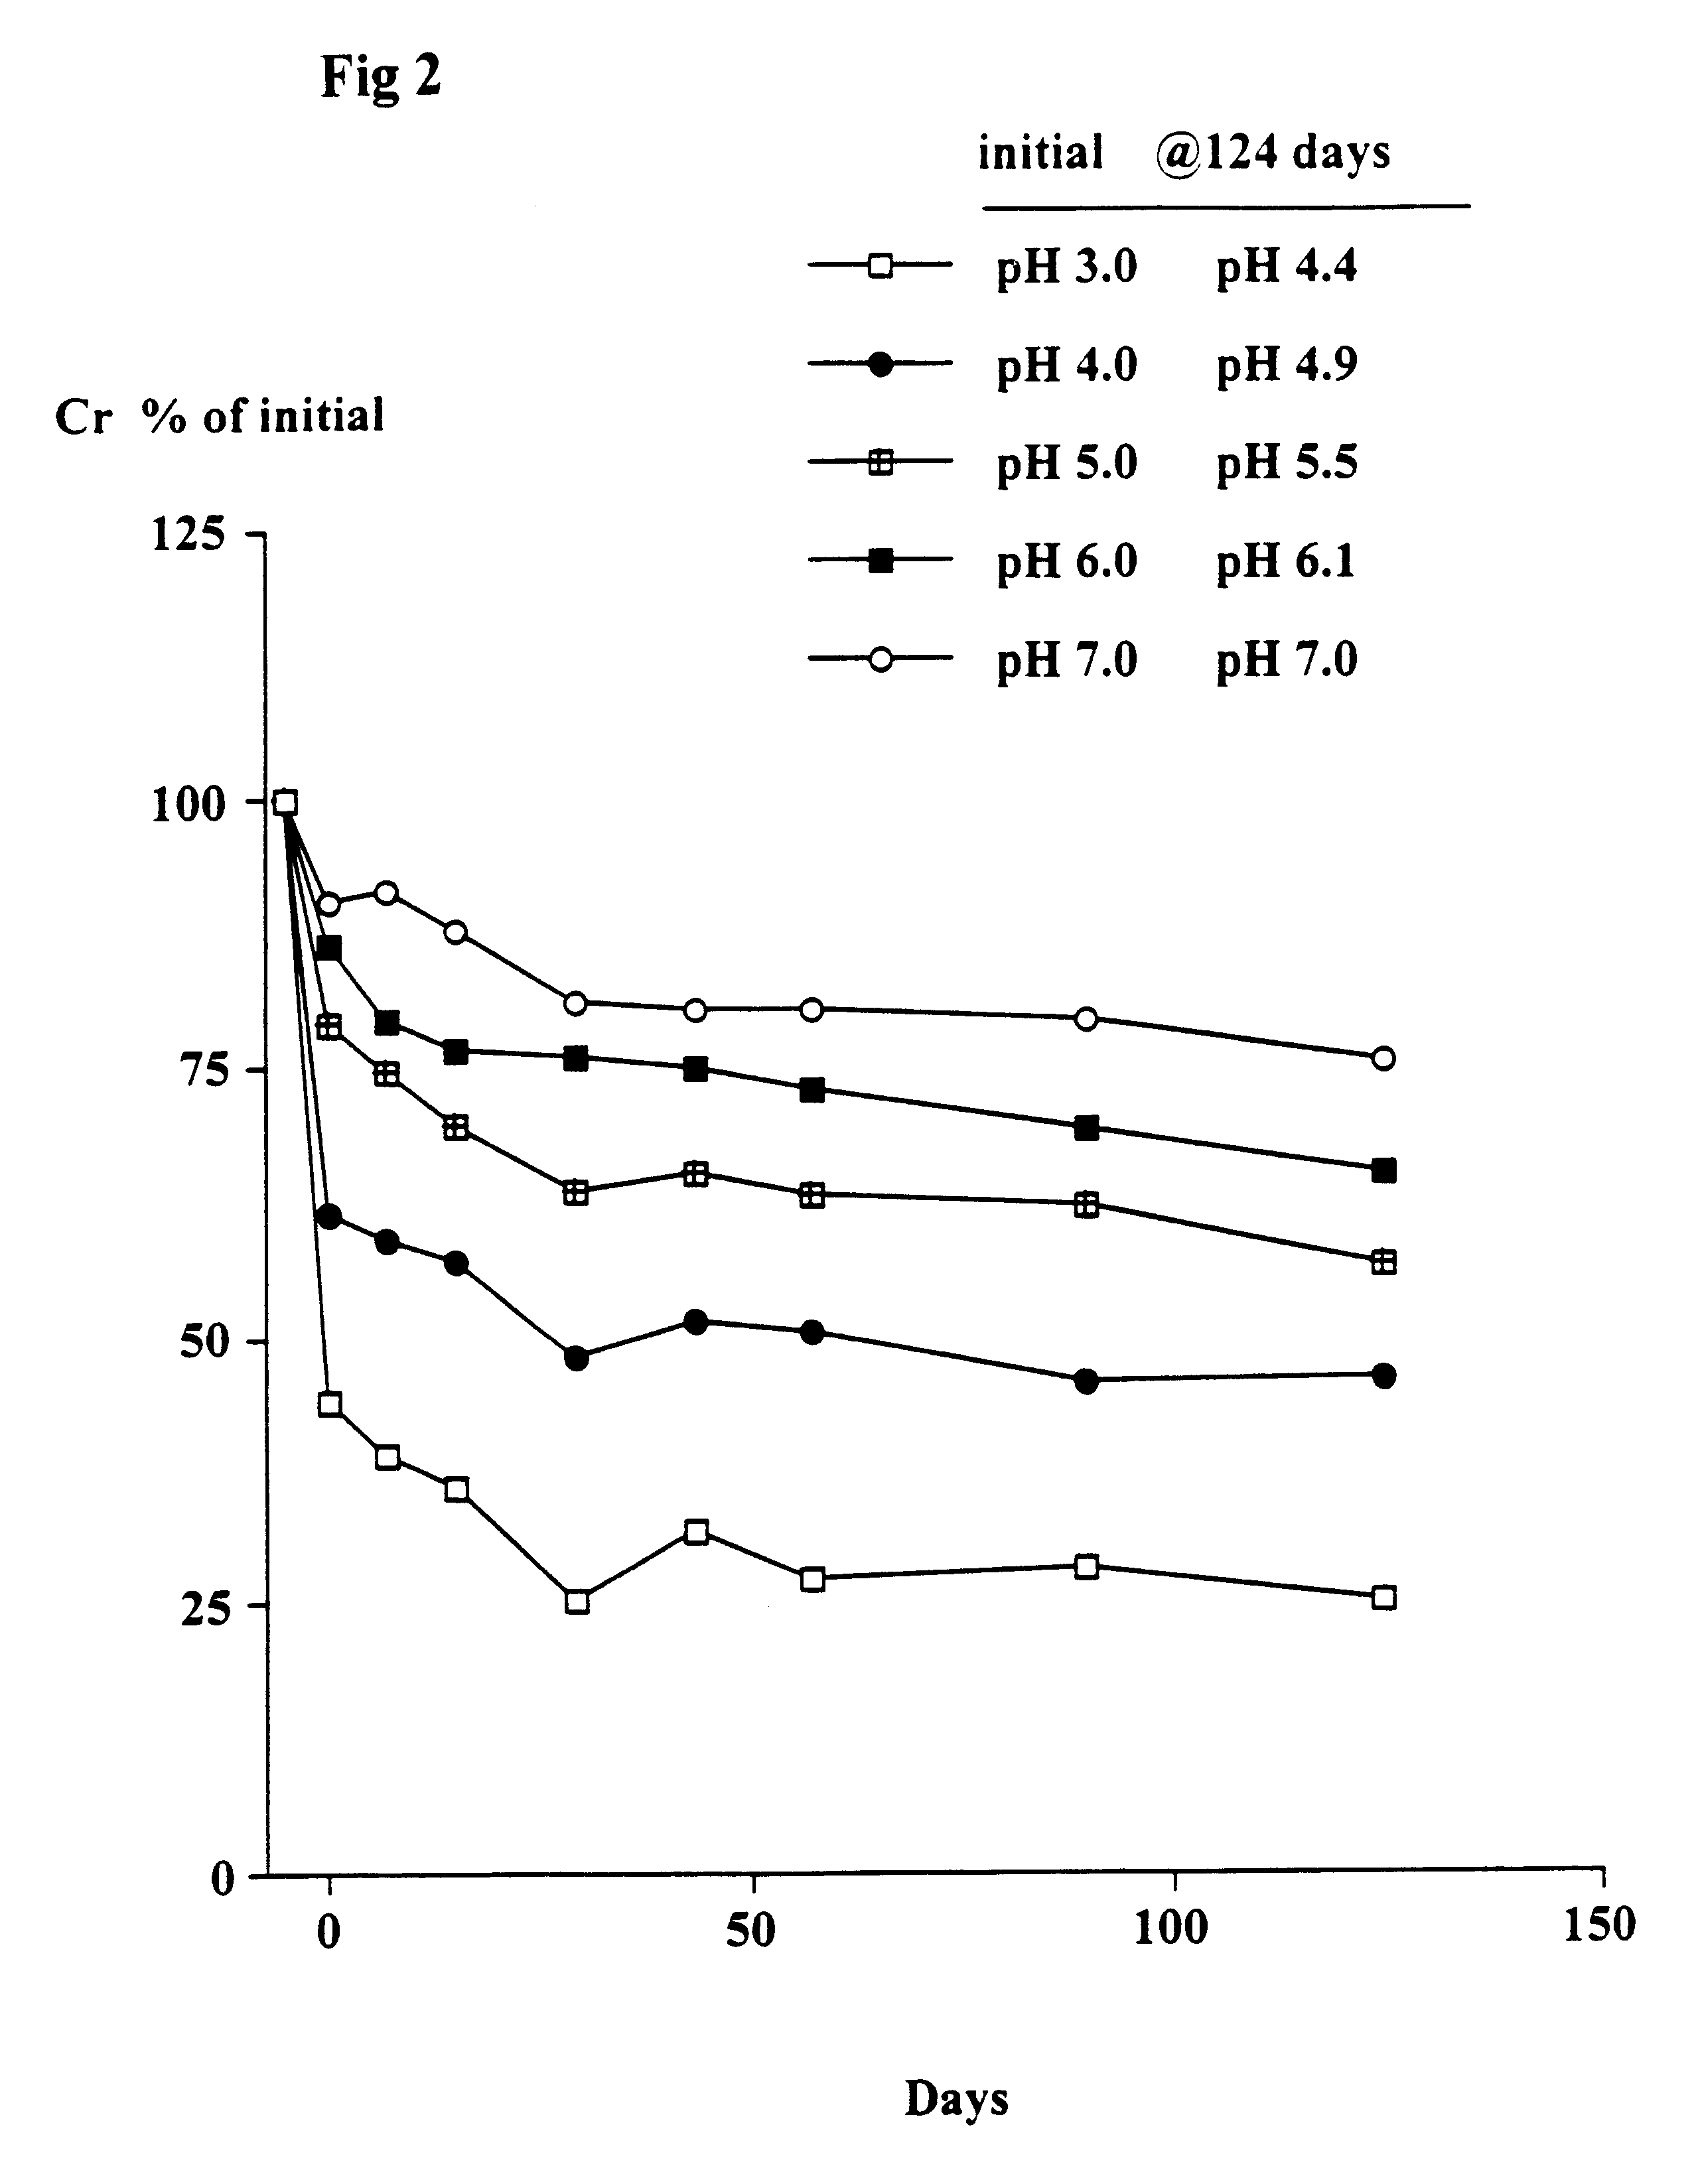 Compositions containing creatine and creatinine